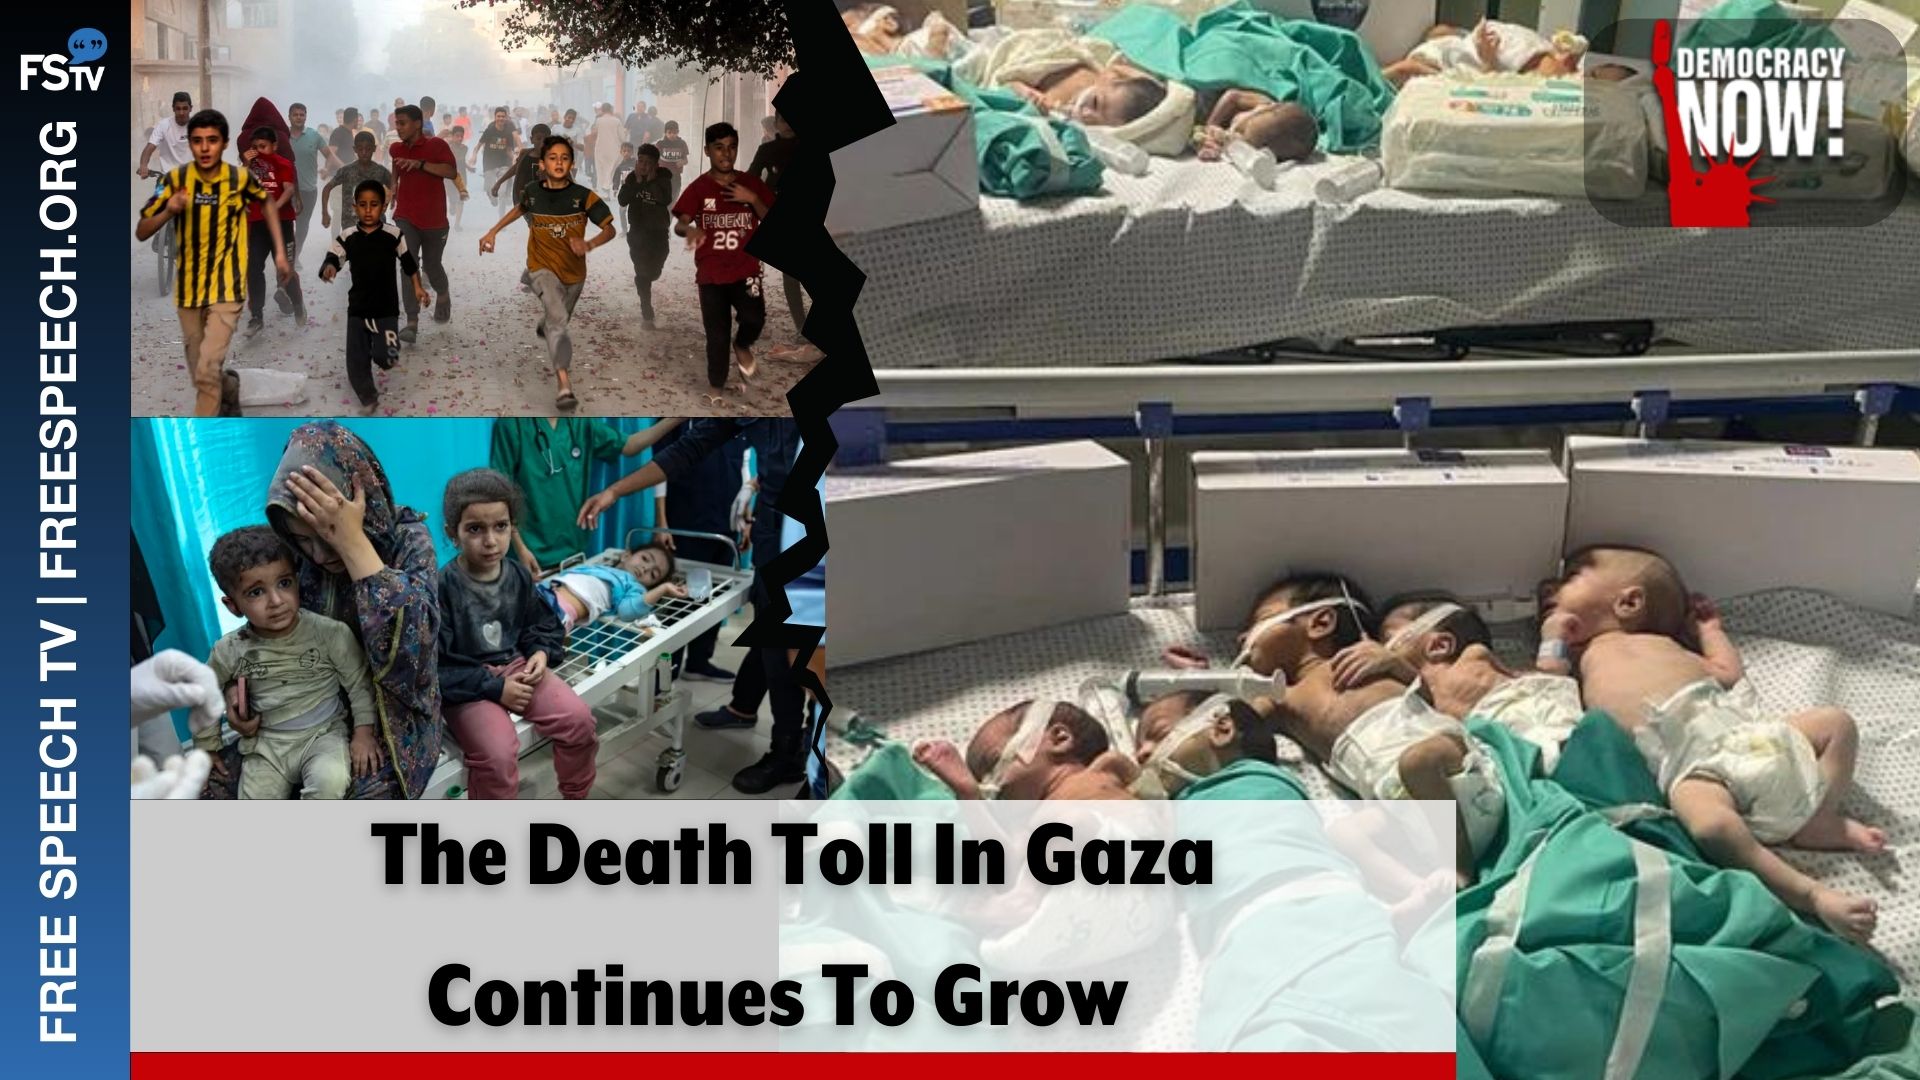 Democracy Now! | The Death Toll In Gaza Continues To Grow